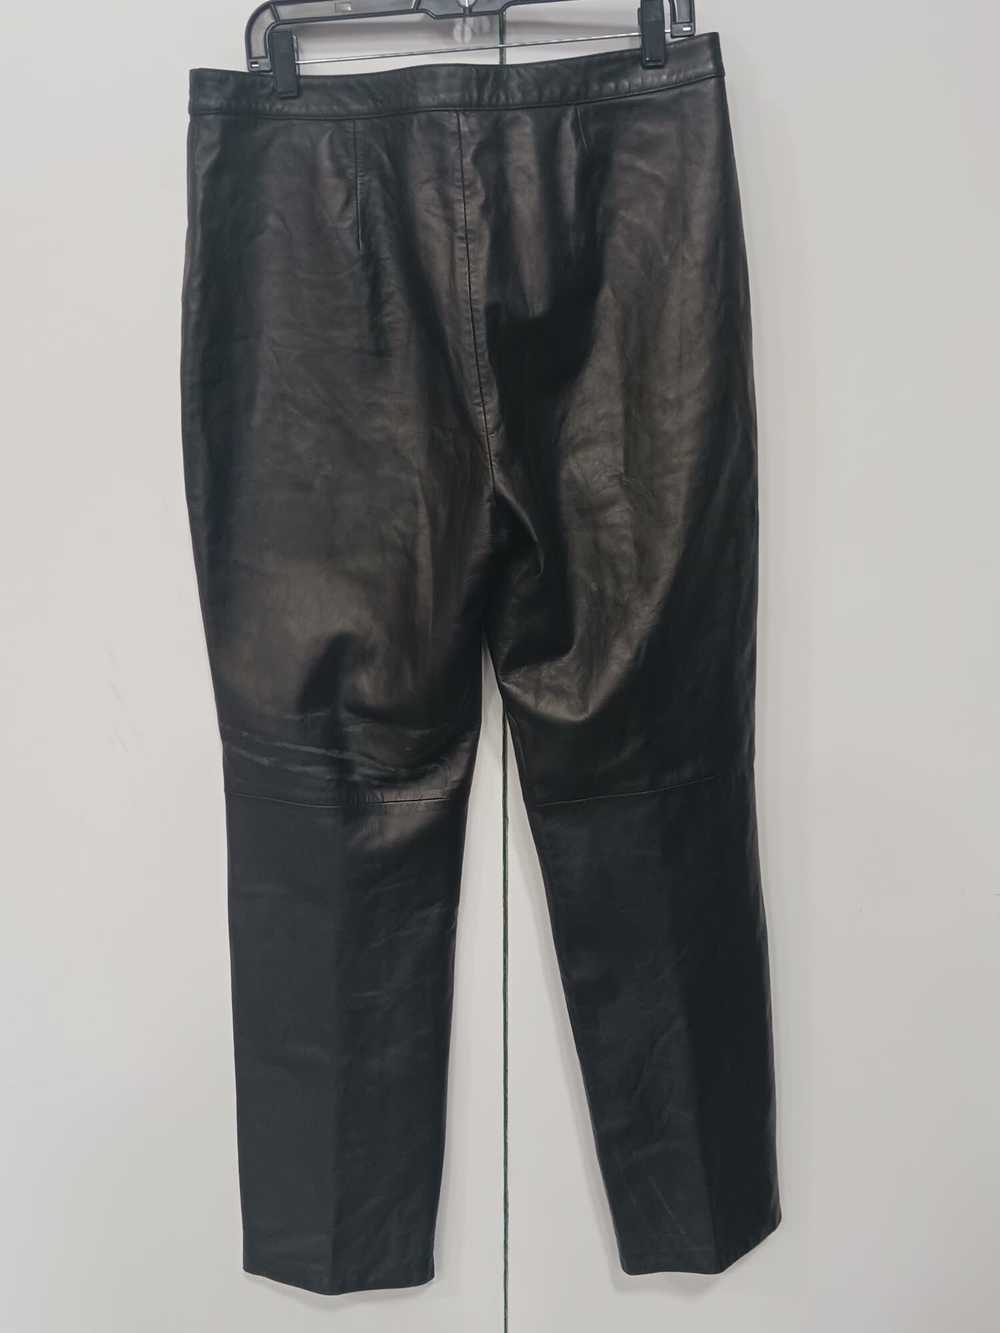 Real Clothes Women's Leather Pants Size 14 - image 2